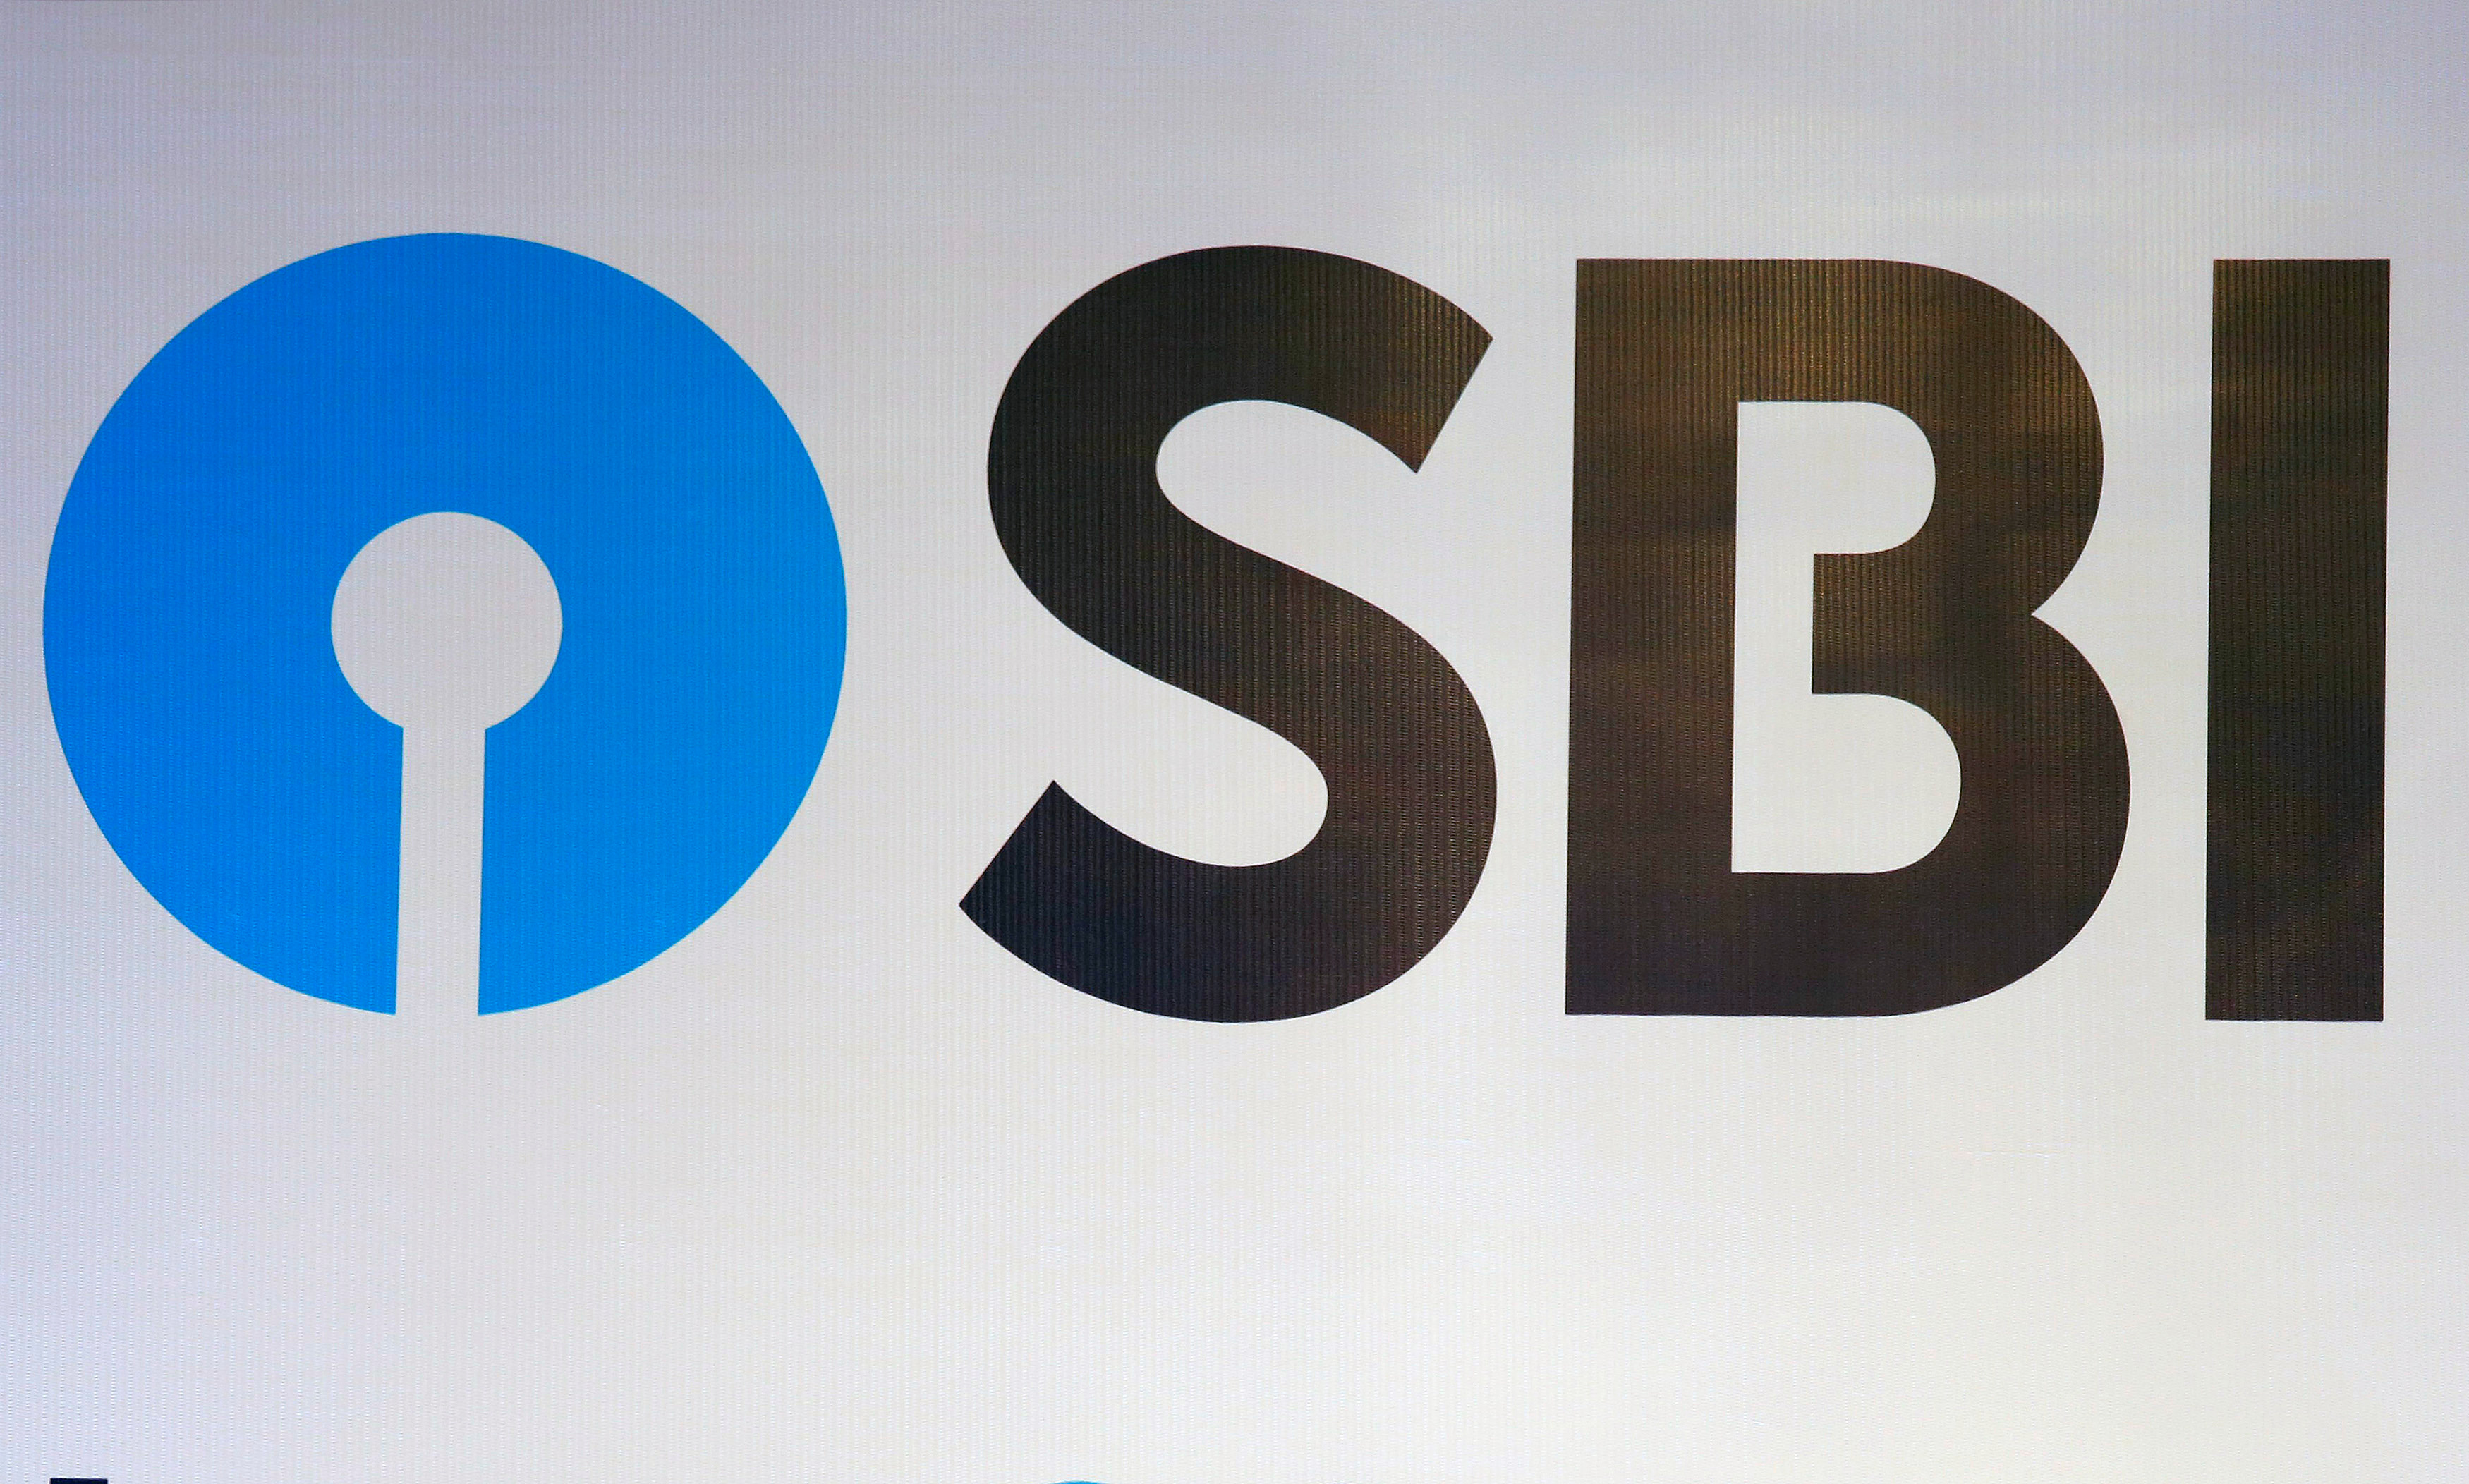 The new logo of State Bank of India (SBI) is pictured at the podium of the venue of a news conference after the announcement of SBI's fourth quarter results, in Kolkata